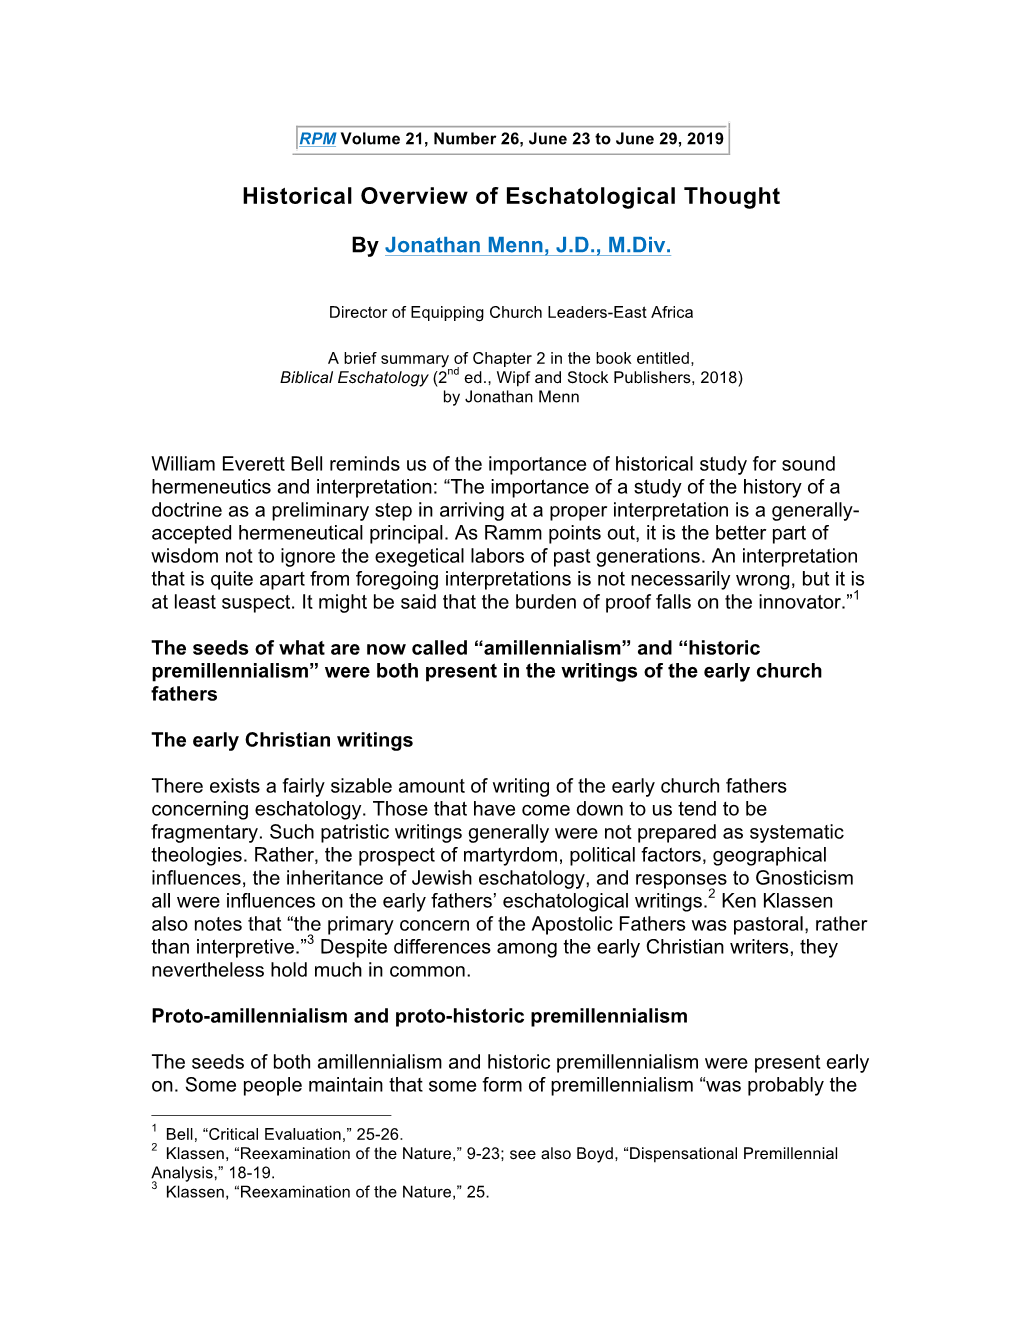 Historical Overview of Eschatological Thought